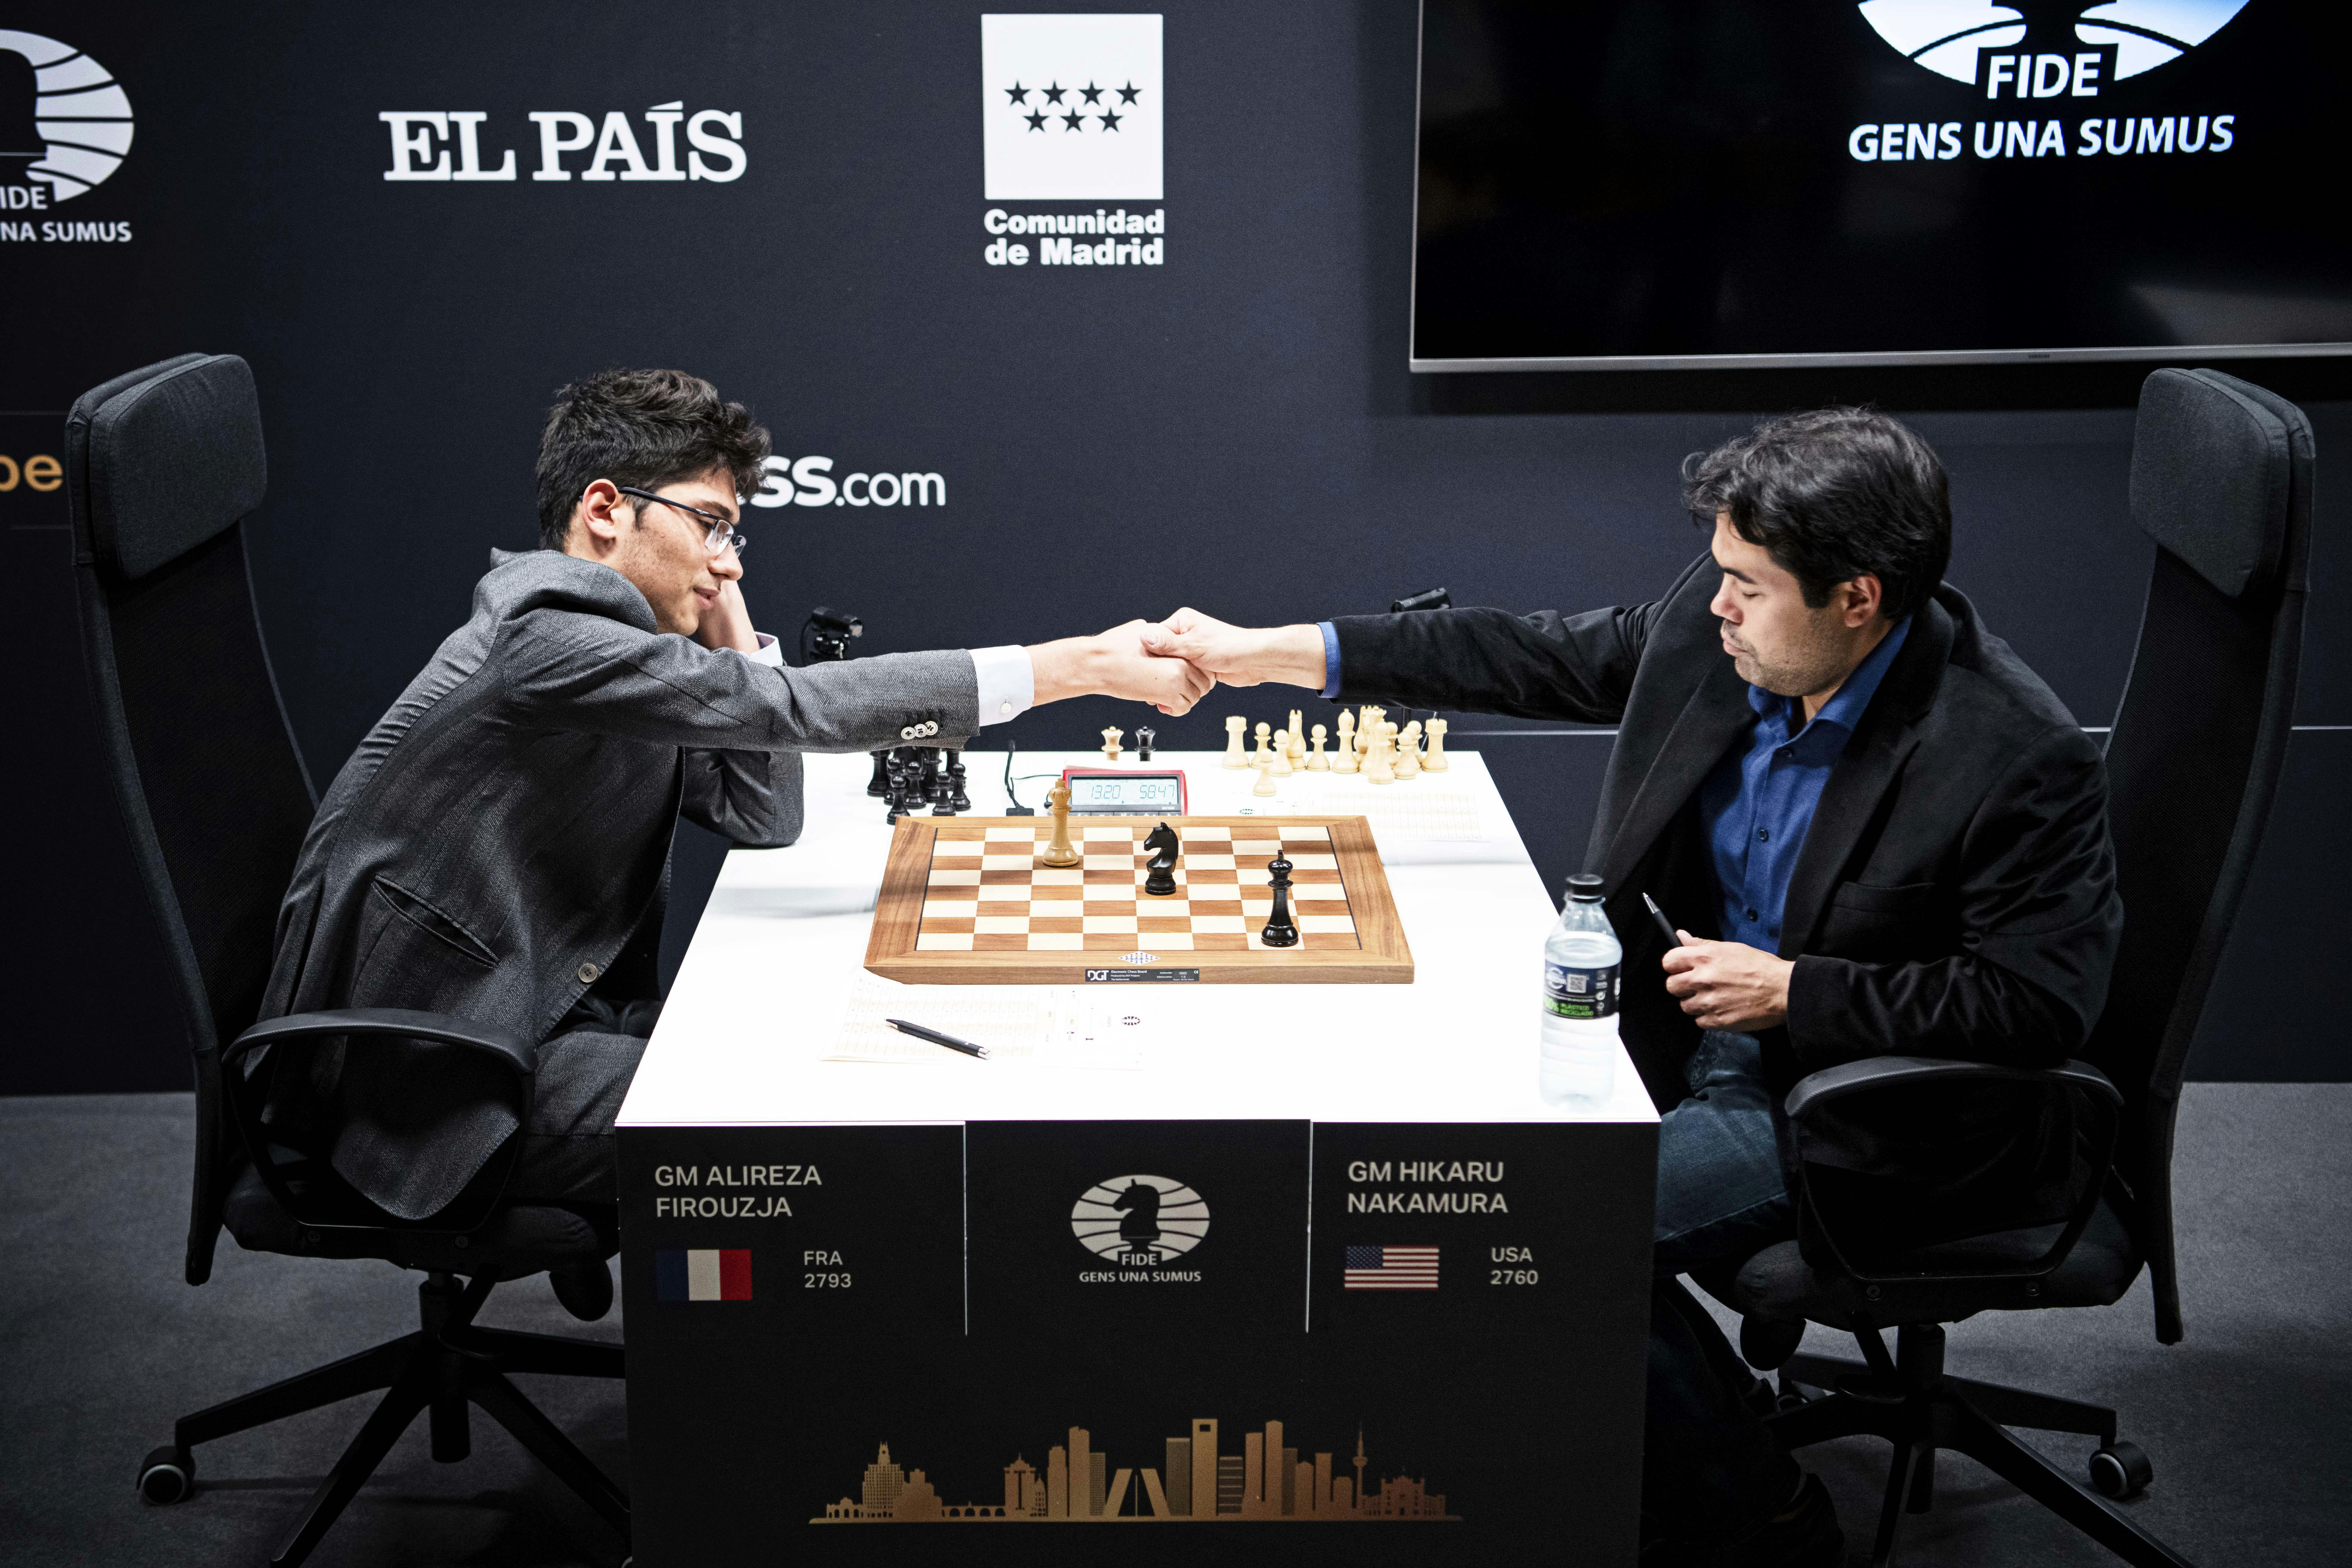 Today in Chess: FIDE Candidates 2022 Round 8 Recap